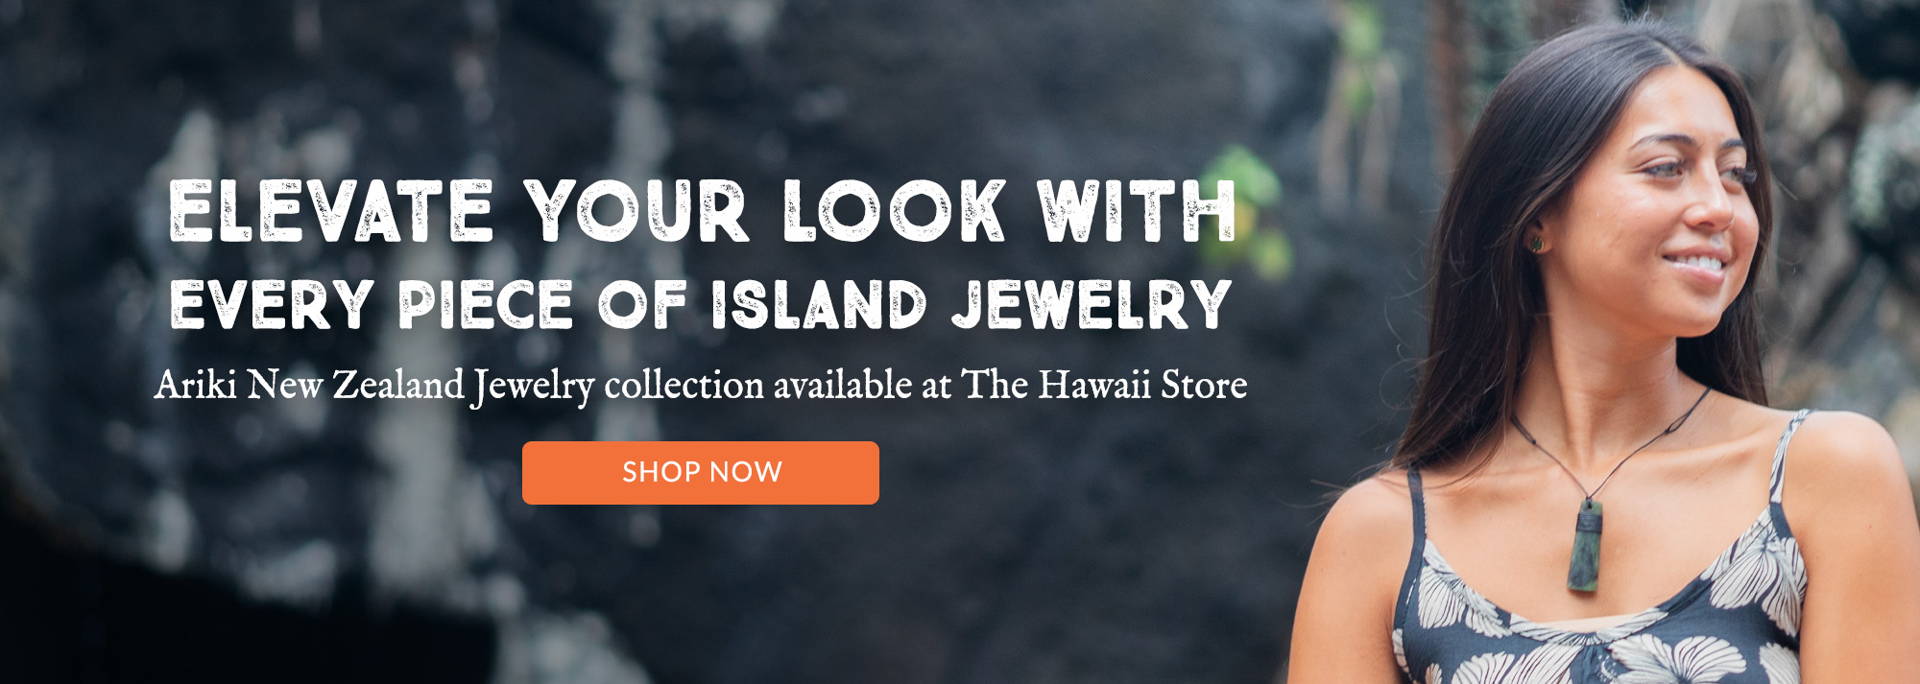 Elevate your look with every piece of Island Jewelry! Ariki New Zealand Jewelry collection available at the Hawaii Store!